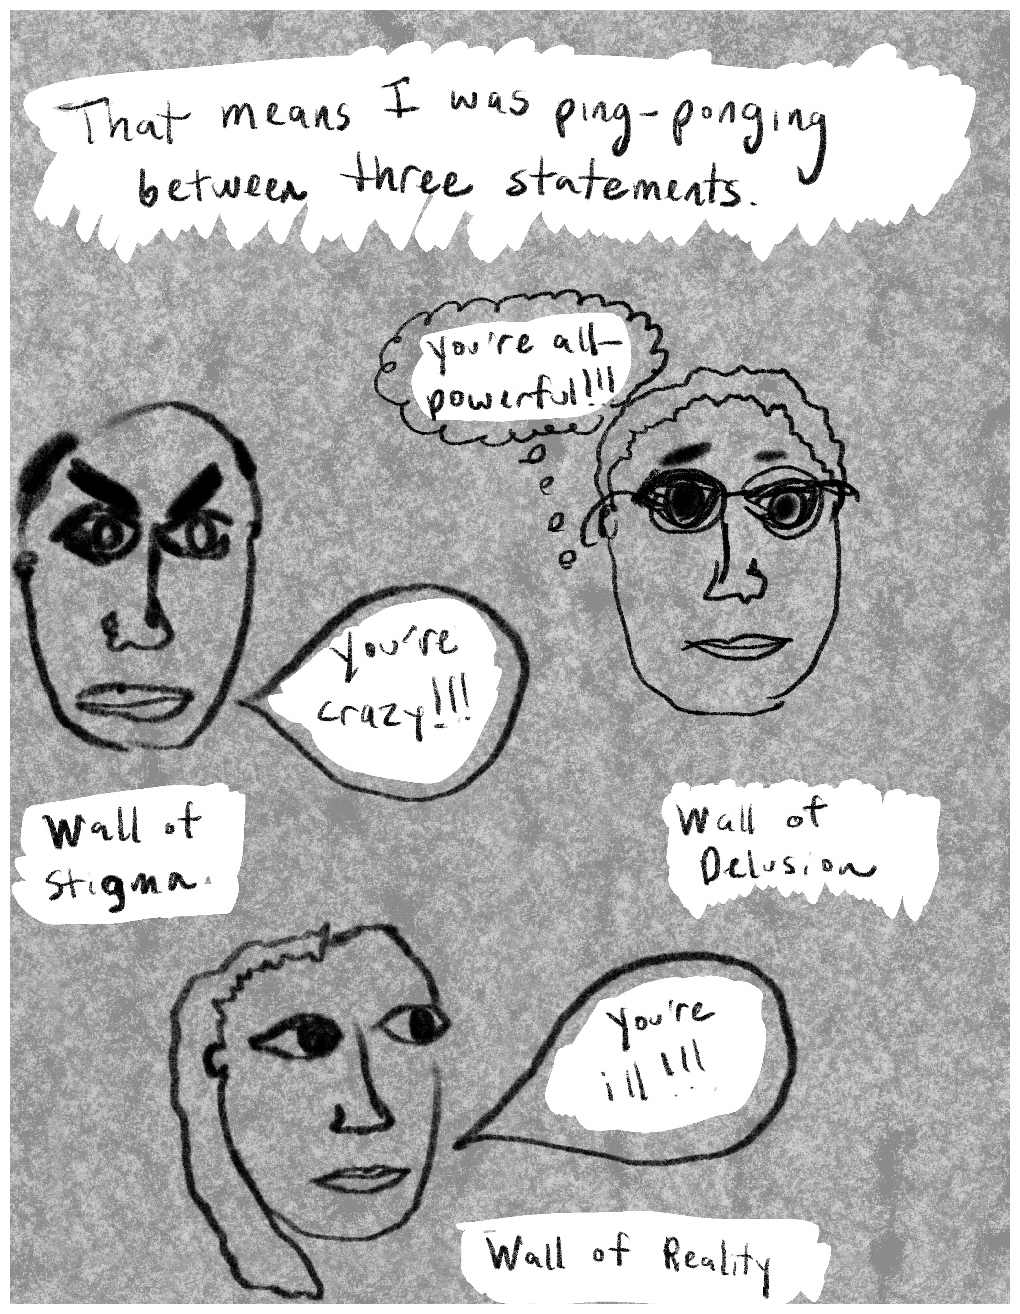 Panel 2 of a six-panel comic called 'Walled in by psychosis', consisting of thick black line drawing on a mottled grey background. Three crudely drawn heads float in the panel. Text at the top of the panel says: "That means I was ping-ponging between three statements". The head to the left of the panel is of a balding male with heavy, creased eyebrows. A speech bubble coming from him says "You're crazy!!!" and immediately below the head is text saying: "Wall of Stigma". The head to the right of the panel is of a younger male with short hair and glasses. A thought bubble coming from him says "You're all-powerful!!!". Directly under this head is text, saying "Wall of Delusion". The third head, at the bottom of the panel is of a female with shoulder-length hair. A speech bubble from her says "You're ill!!!" and beneath this, the text says "Wall of Reality". 